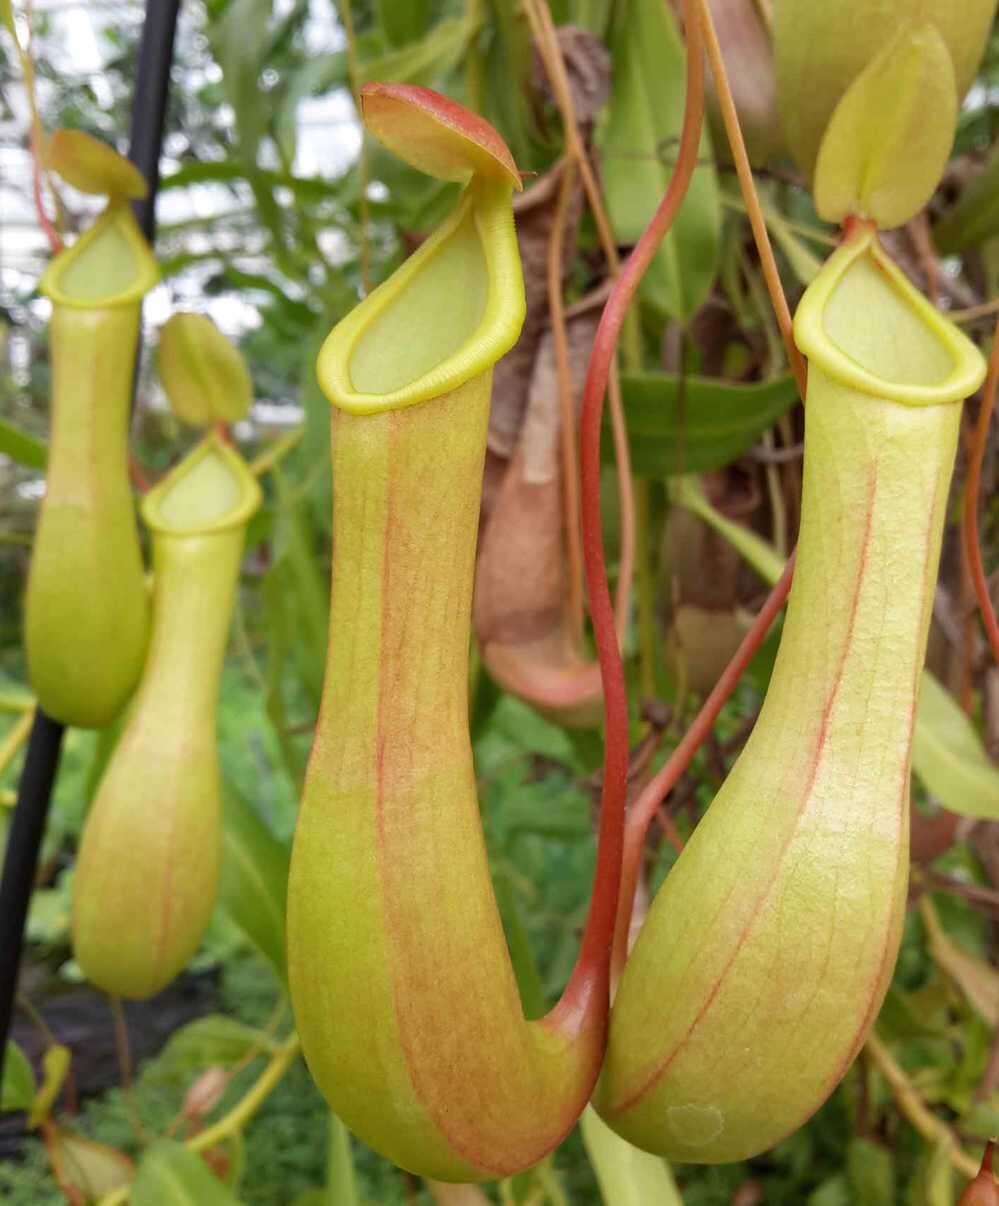 Image of Nepenthes alata Blanco